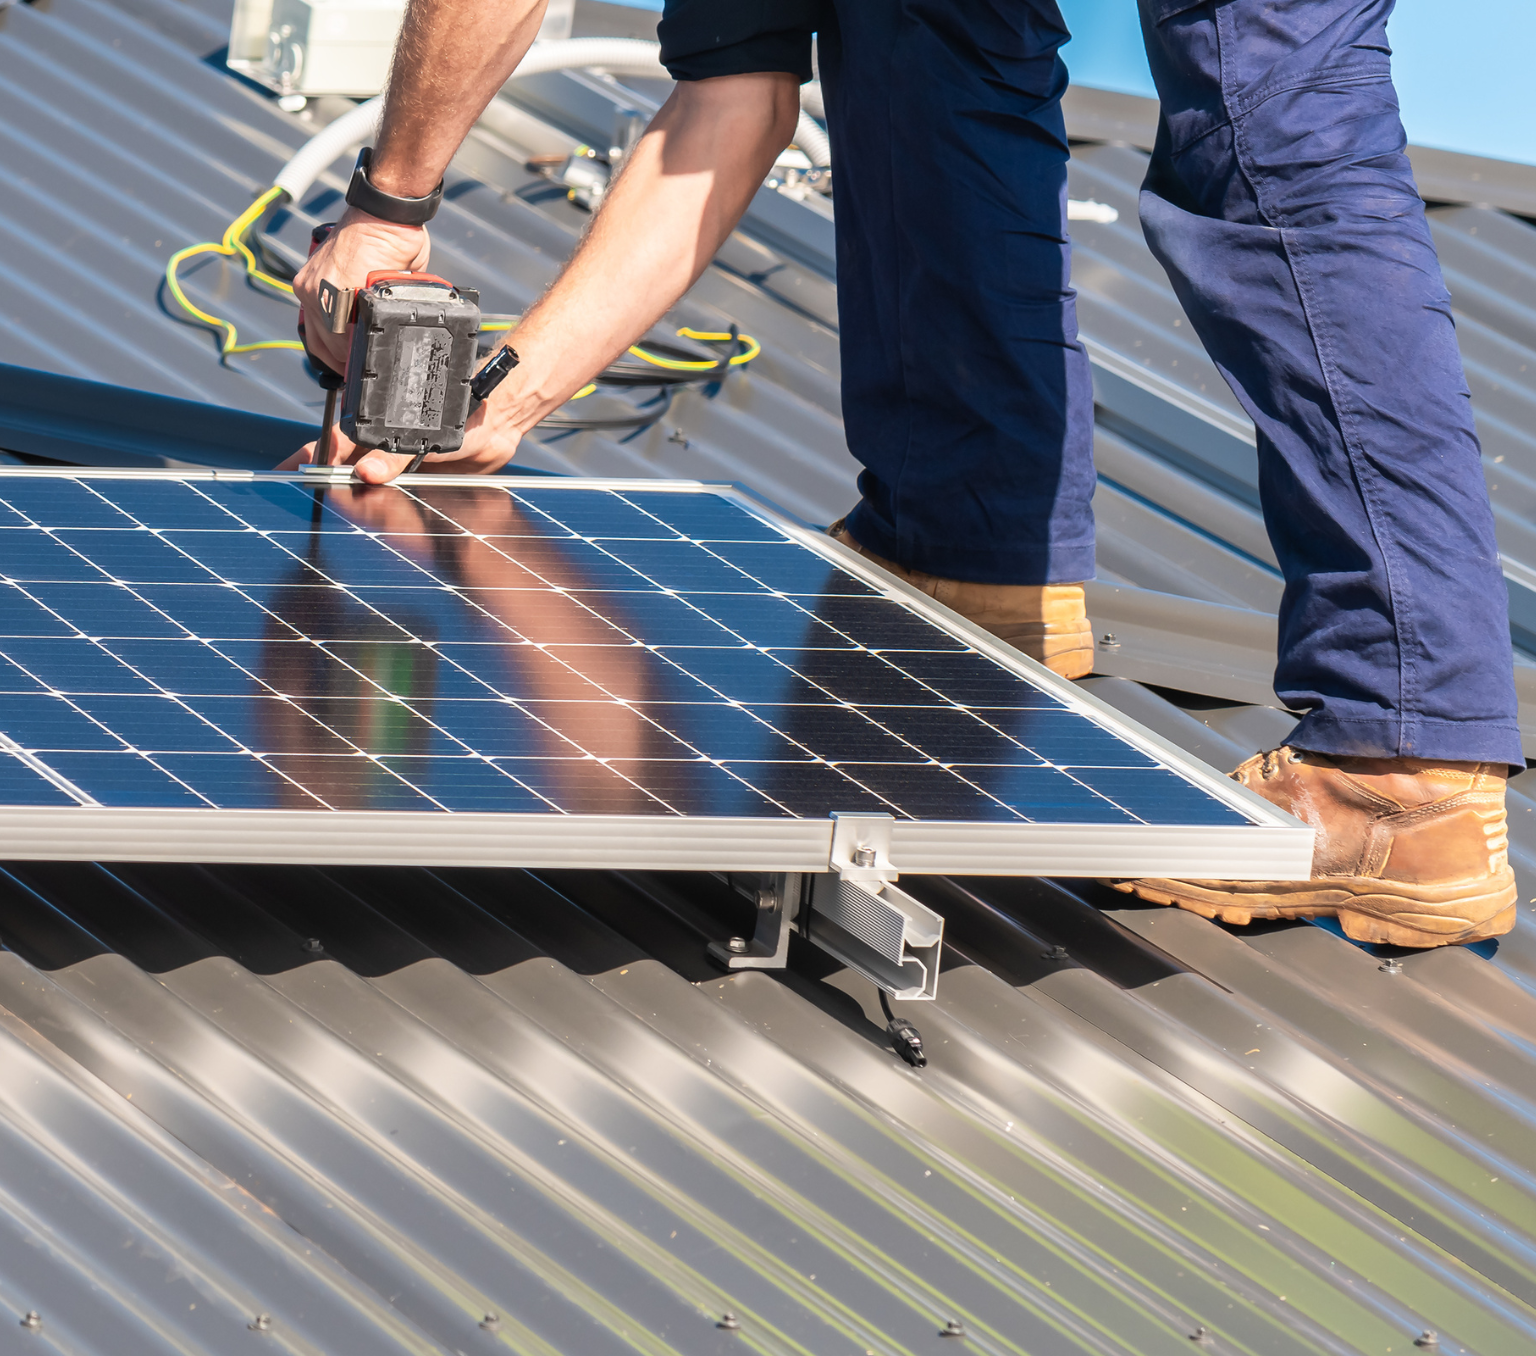 A man stands on a roof, bent over while using a drill near a solar panel.